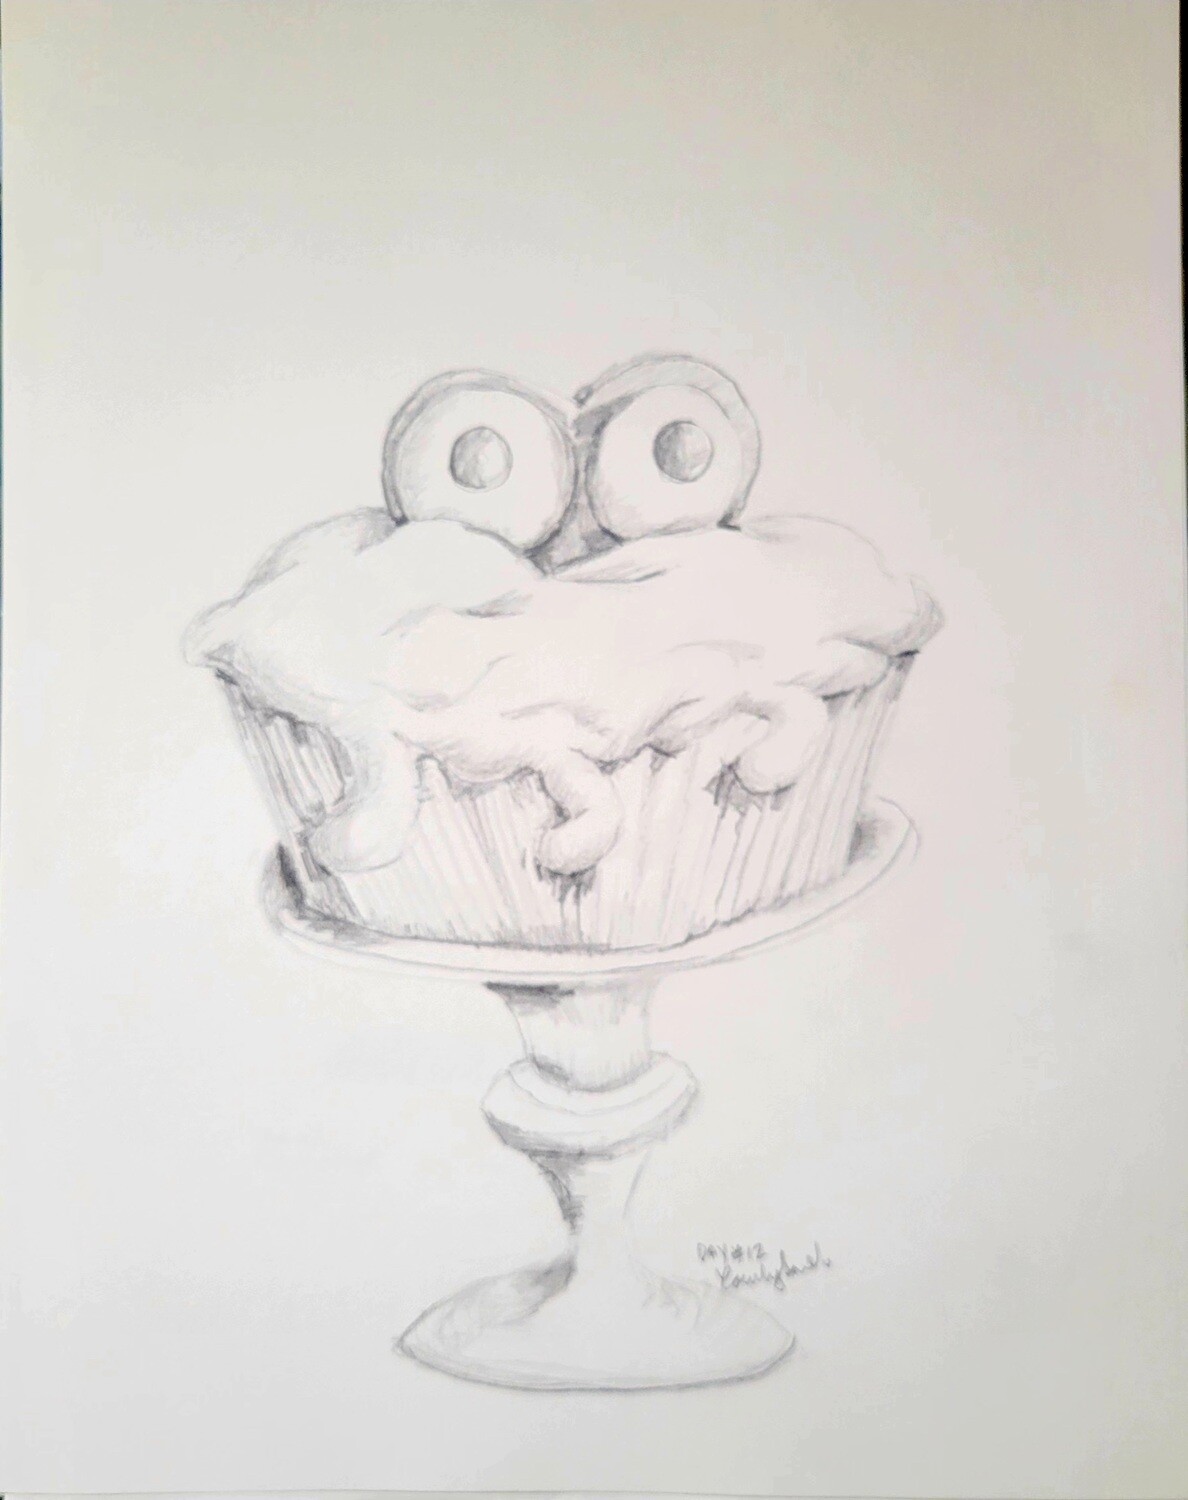 Cookie Cupcake Original pencil on paper 9 x 12 inches